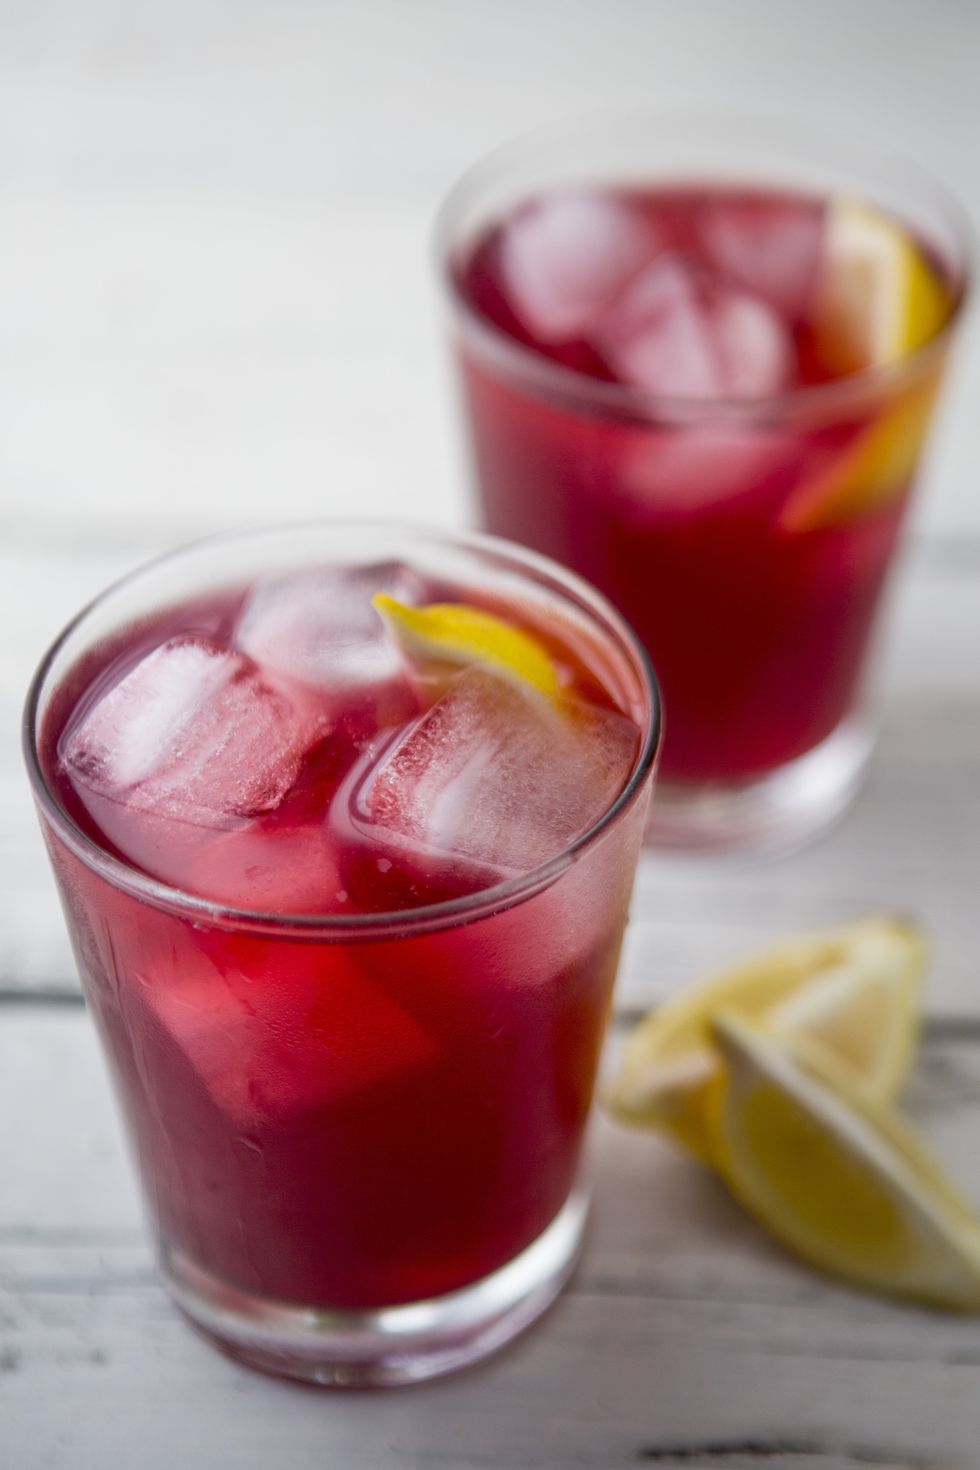 Cranberry juice will not cure your UTI